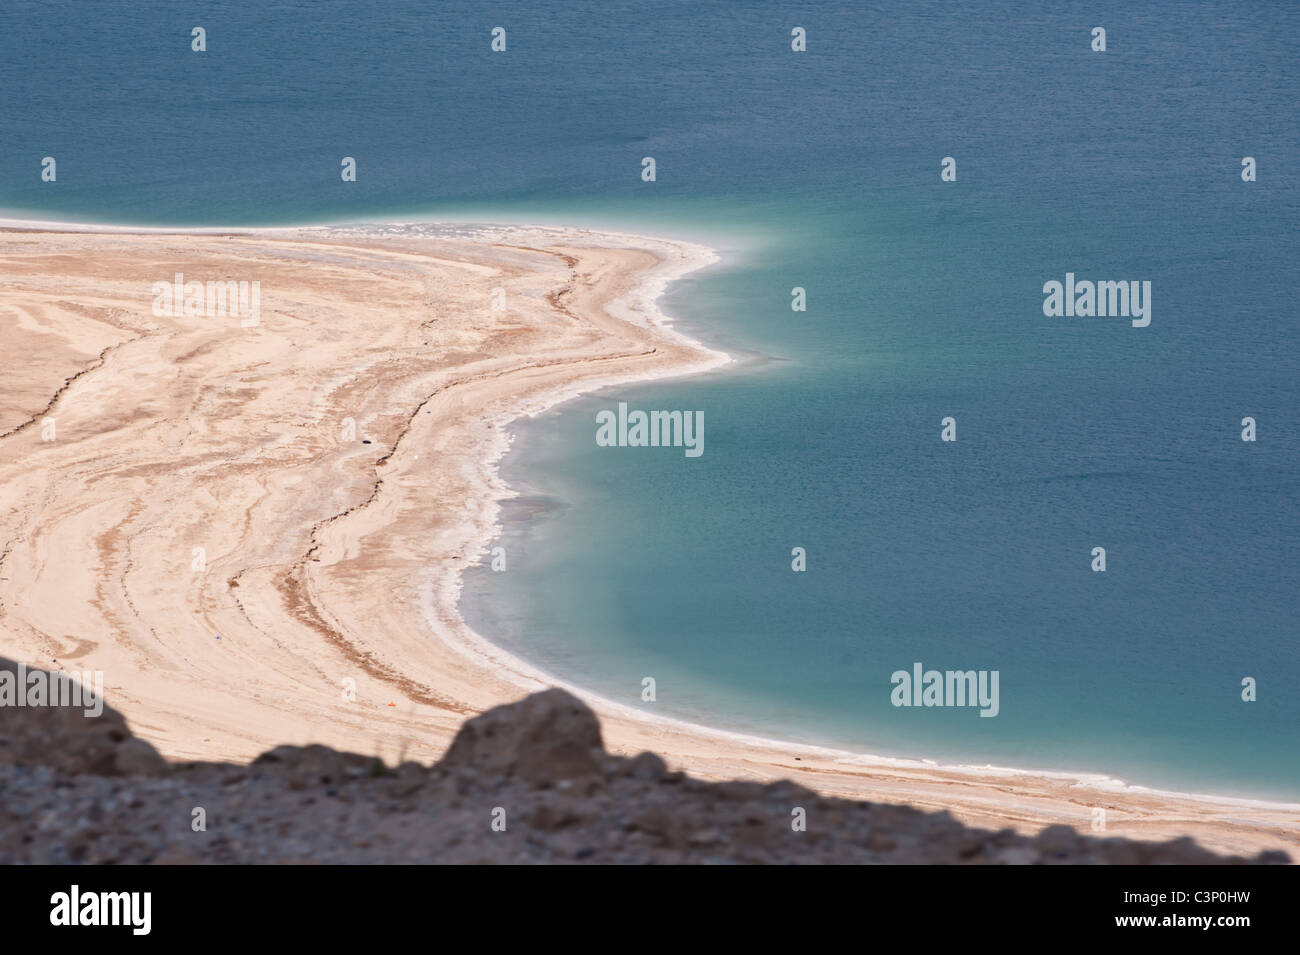 The exceptionally salty waters of the Dead Sea form encrusted layers of minerals along the shore. Stock Photo